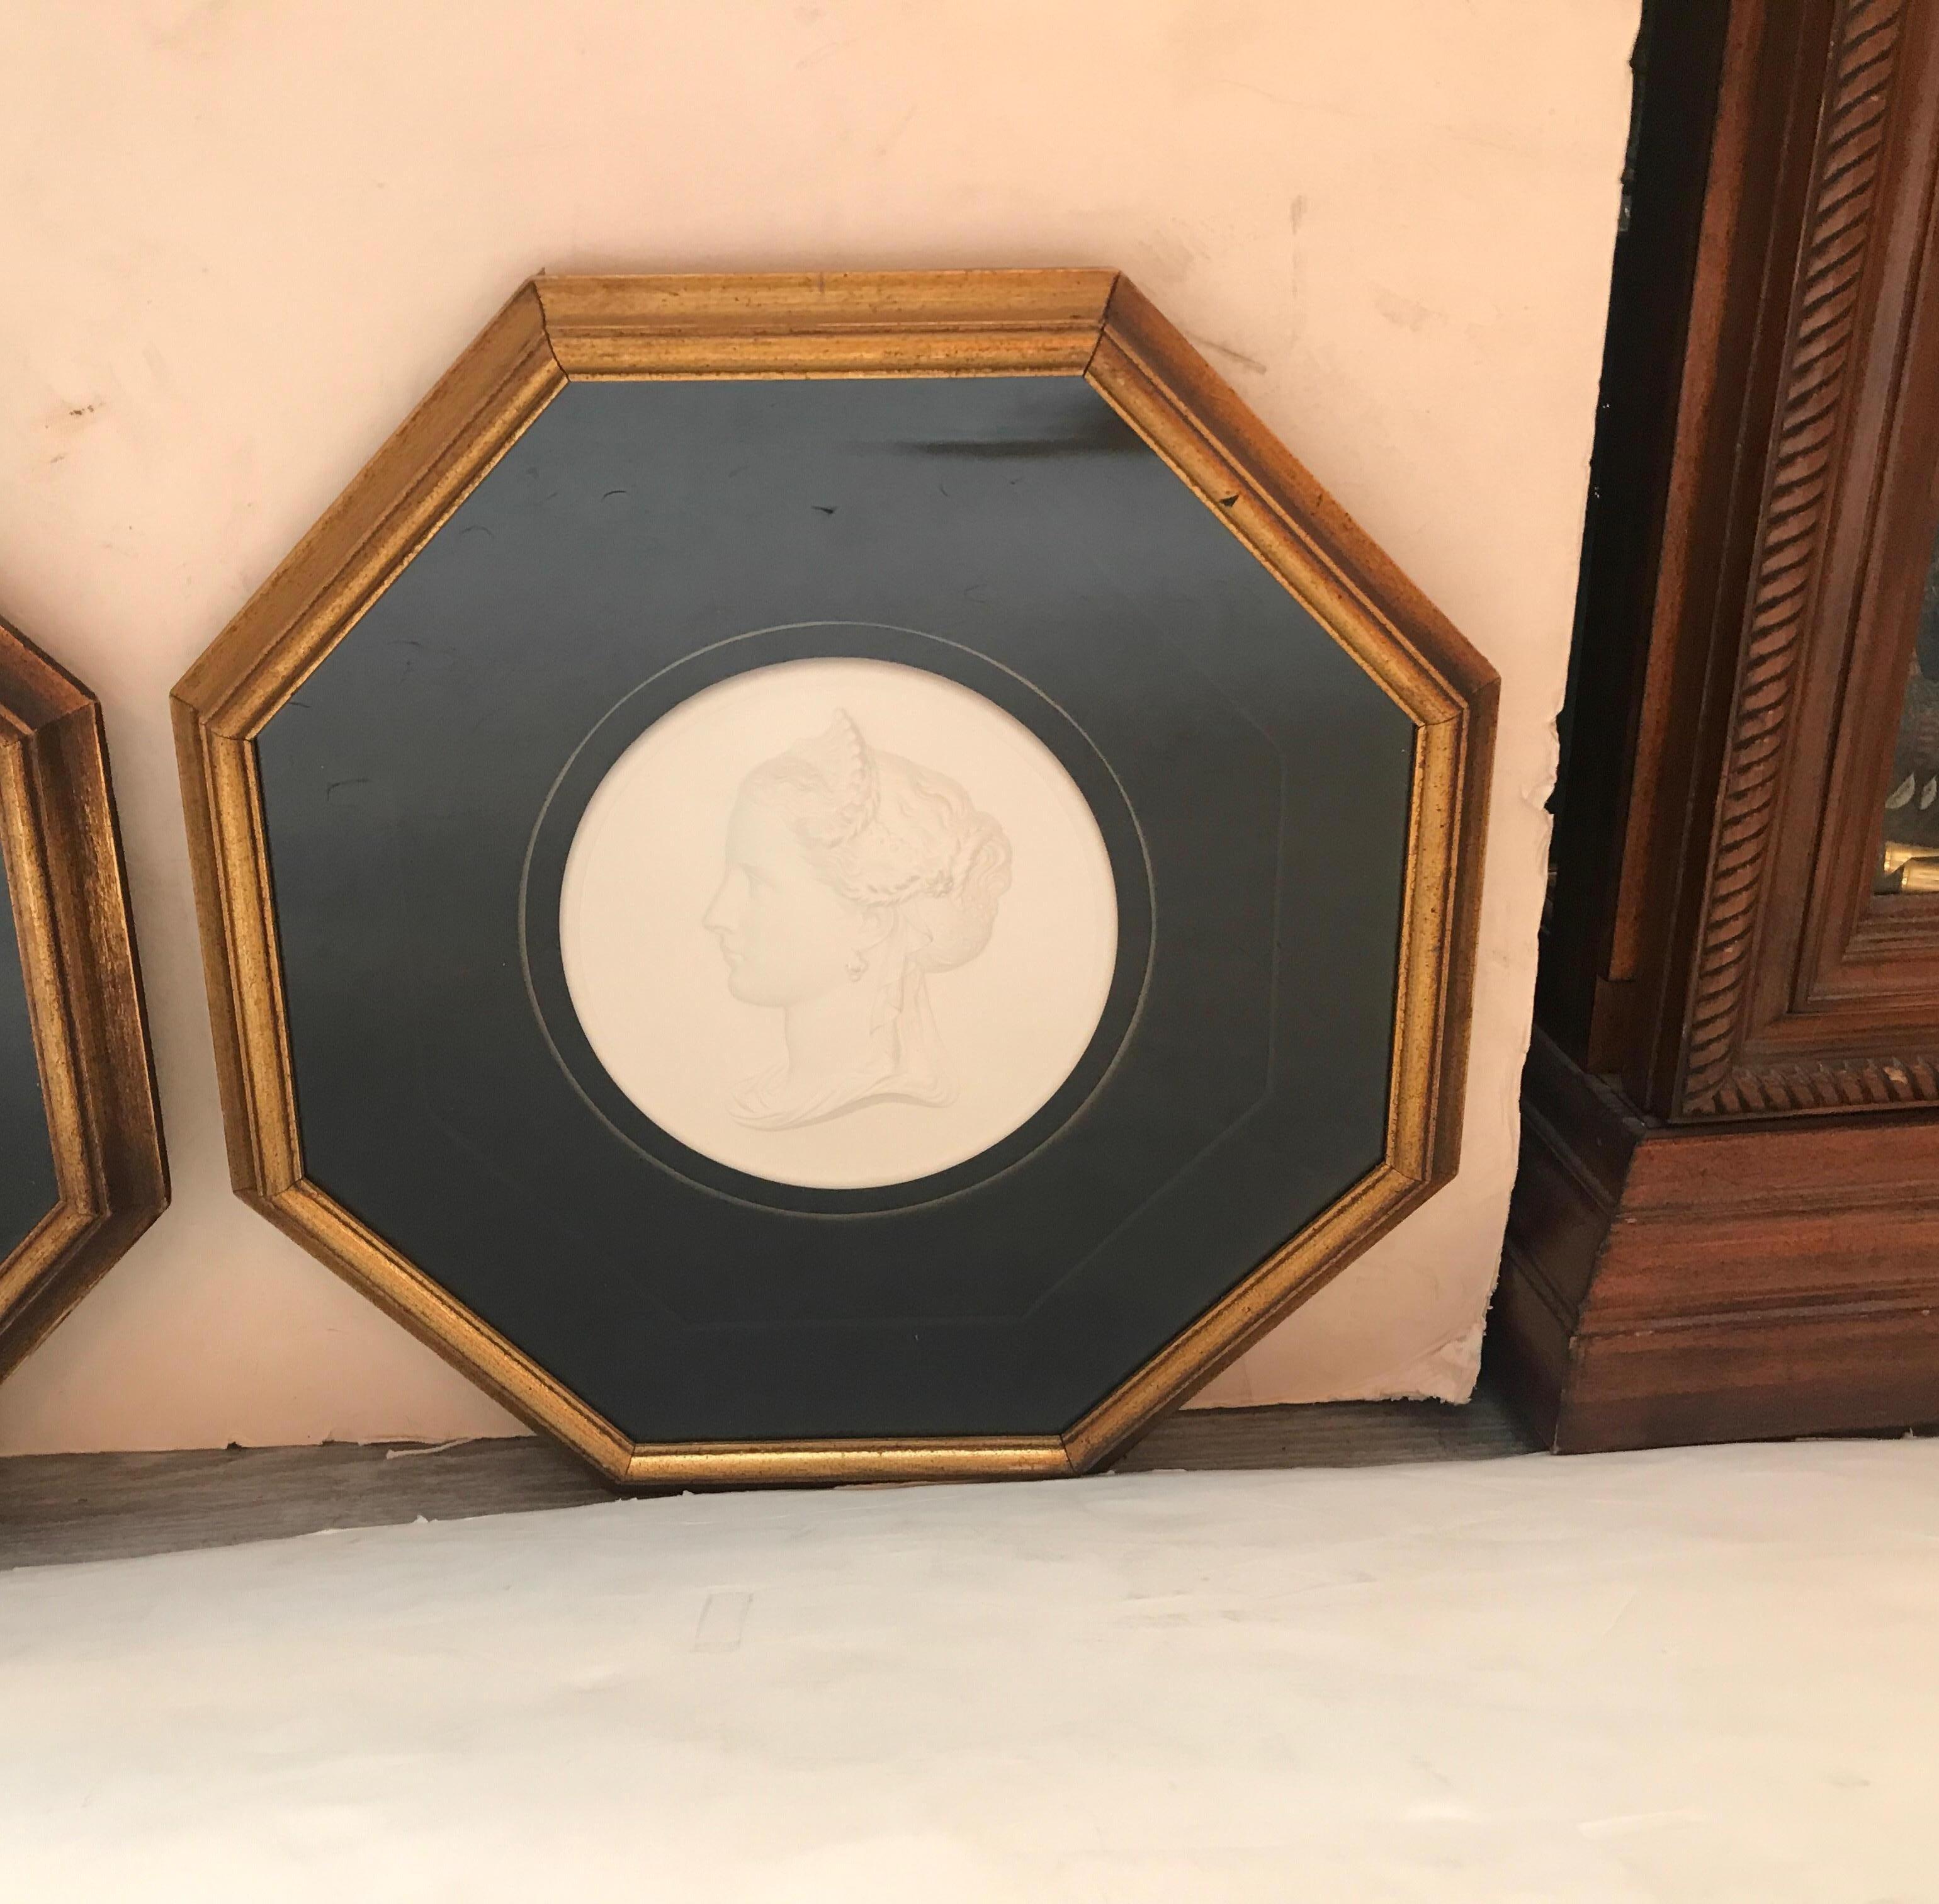 A mirror image pair of bas relief giltwood framed plaster plaques depicting neoclassical profile portraits on a black velvet background. Each one of a beautiful neoclassic style young woman with crown and aristocratic clothing.